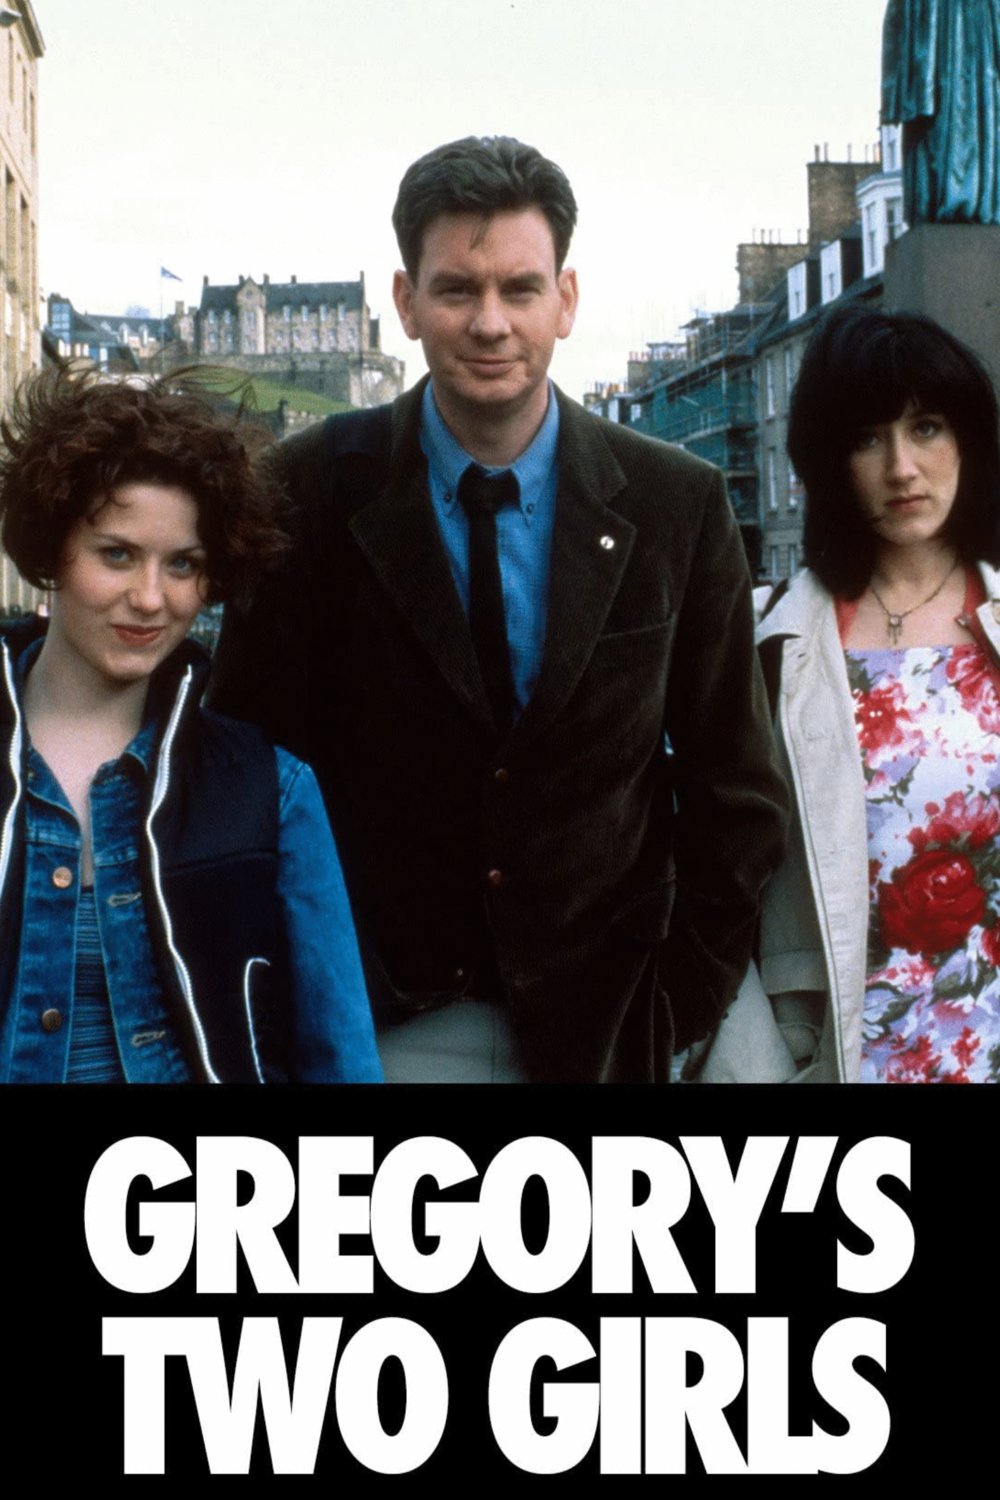 Poster of the movie Gregory's Two Girls